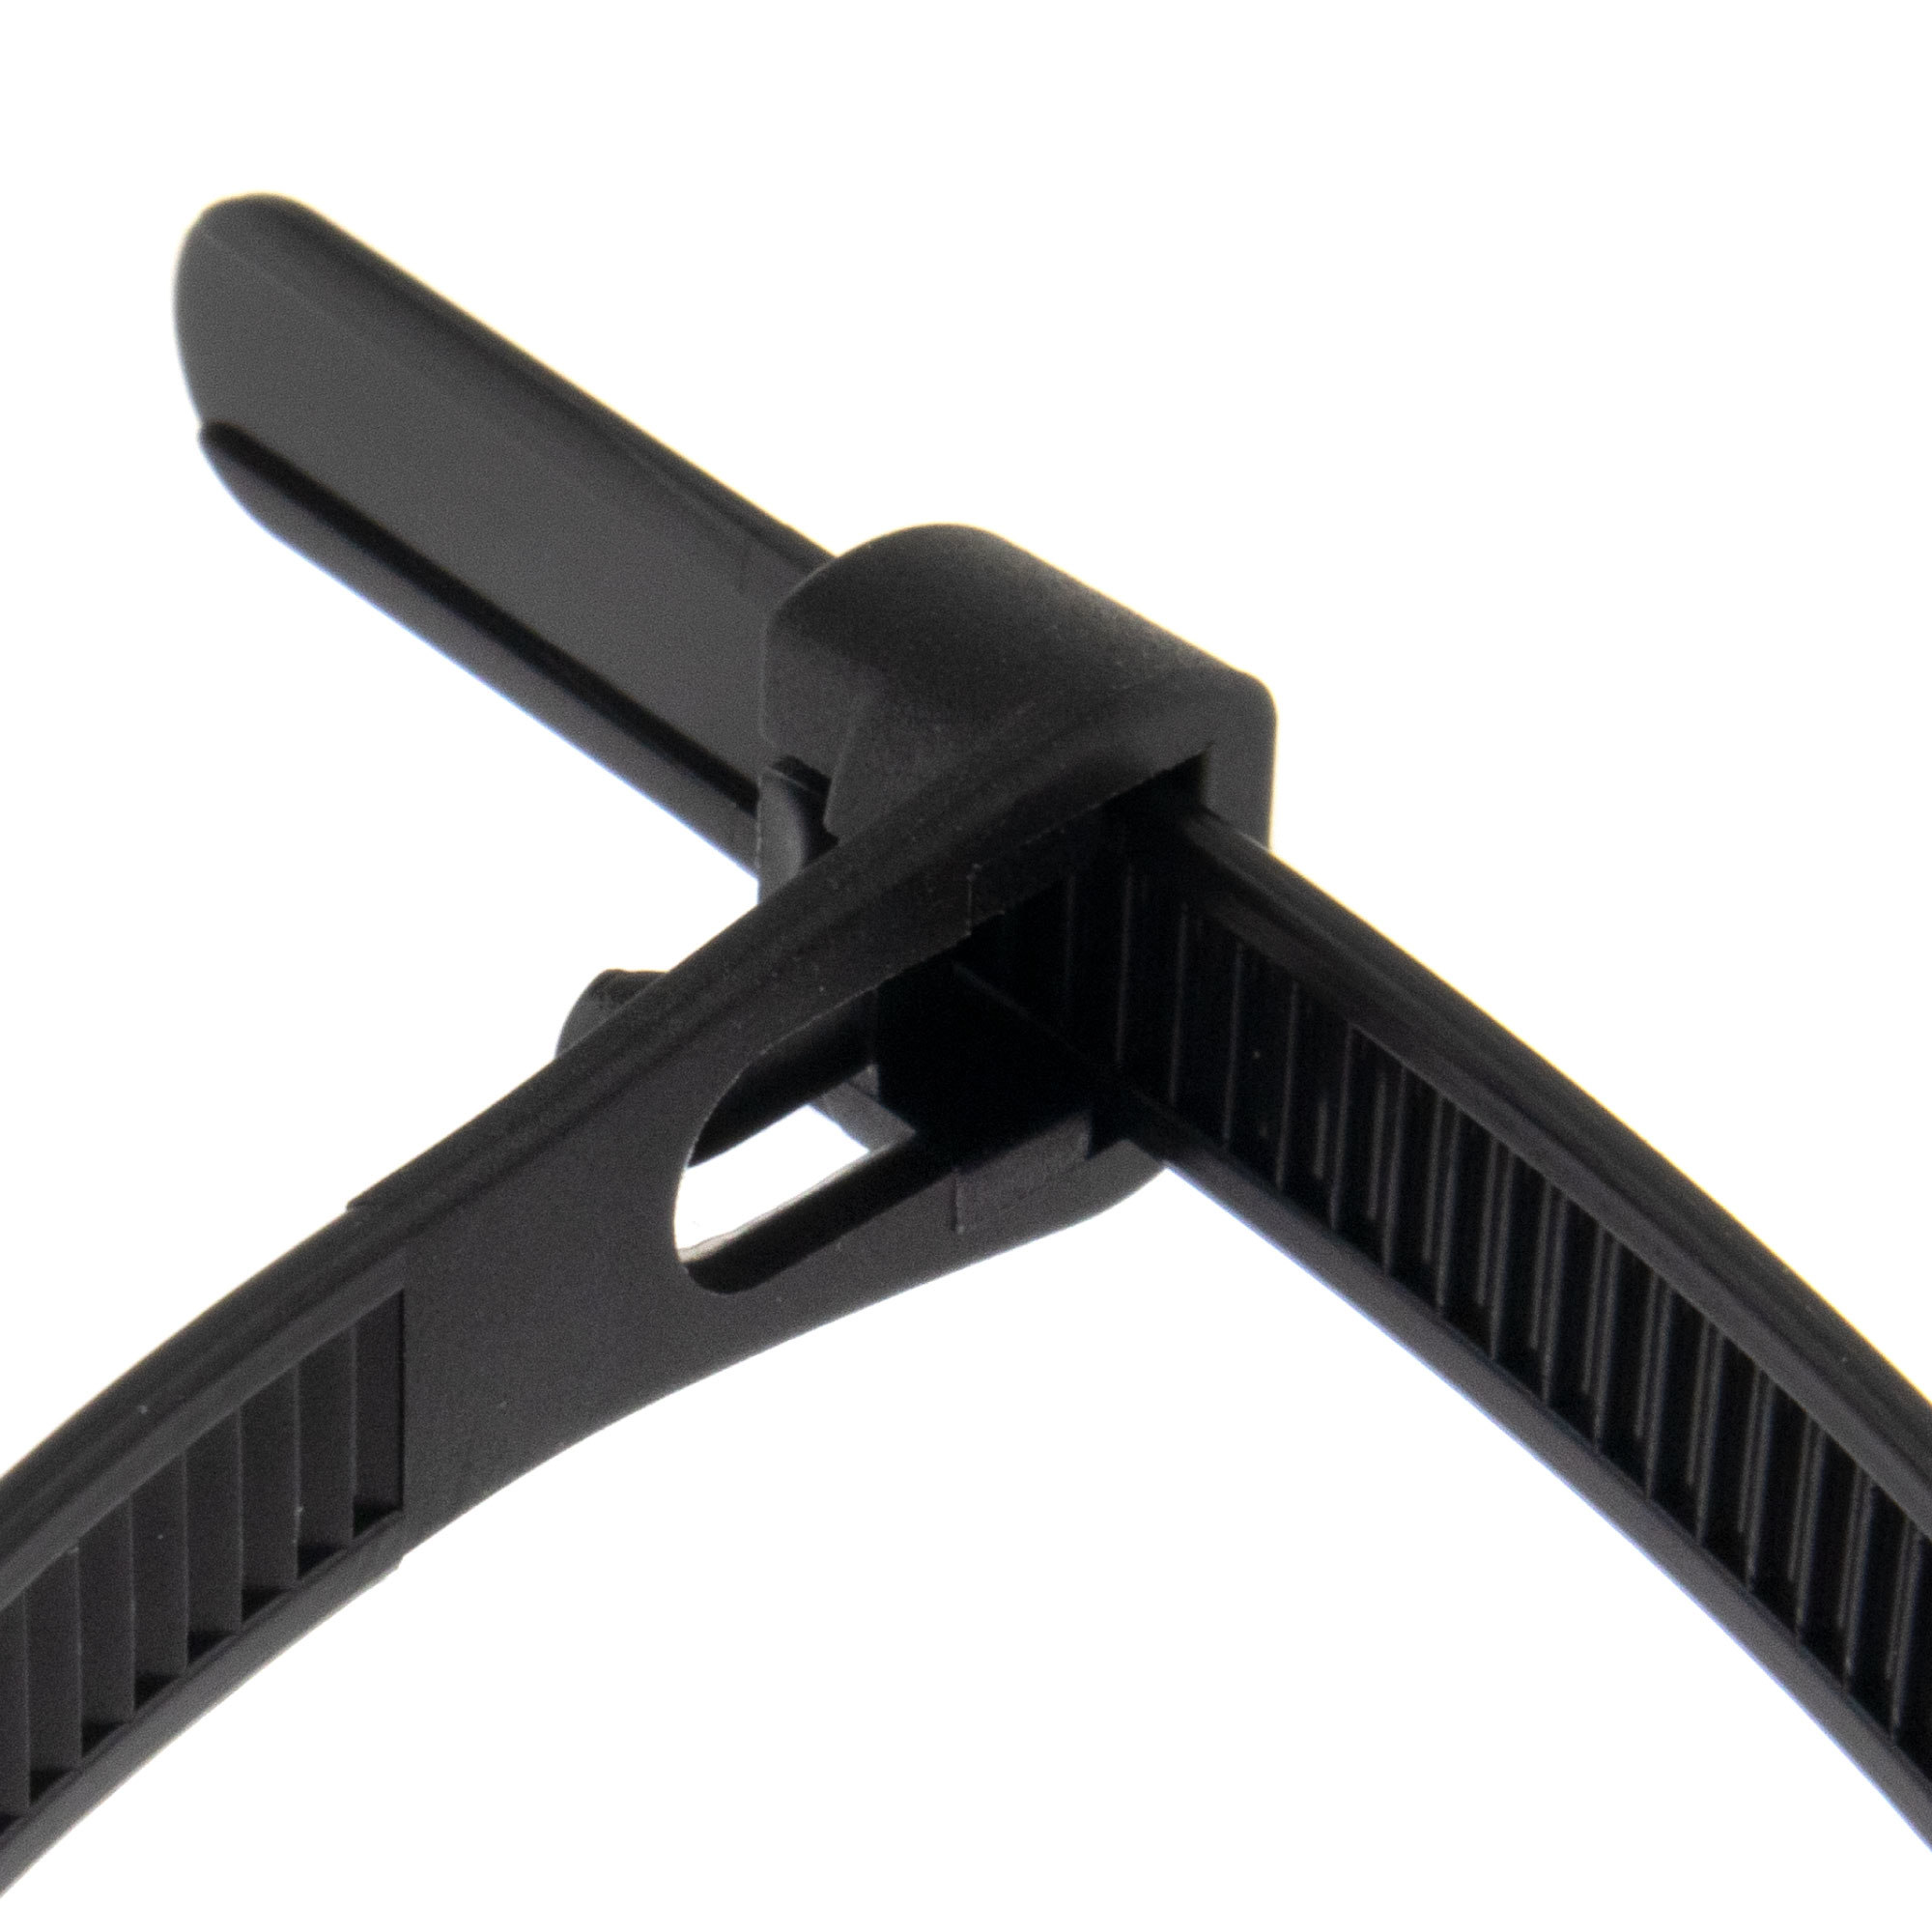 Cable tie re-use-able 200 x 4,8mm, black, 100PCS